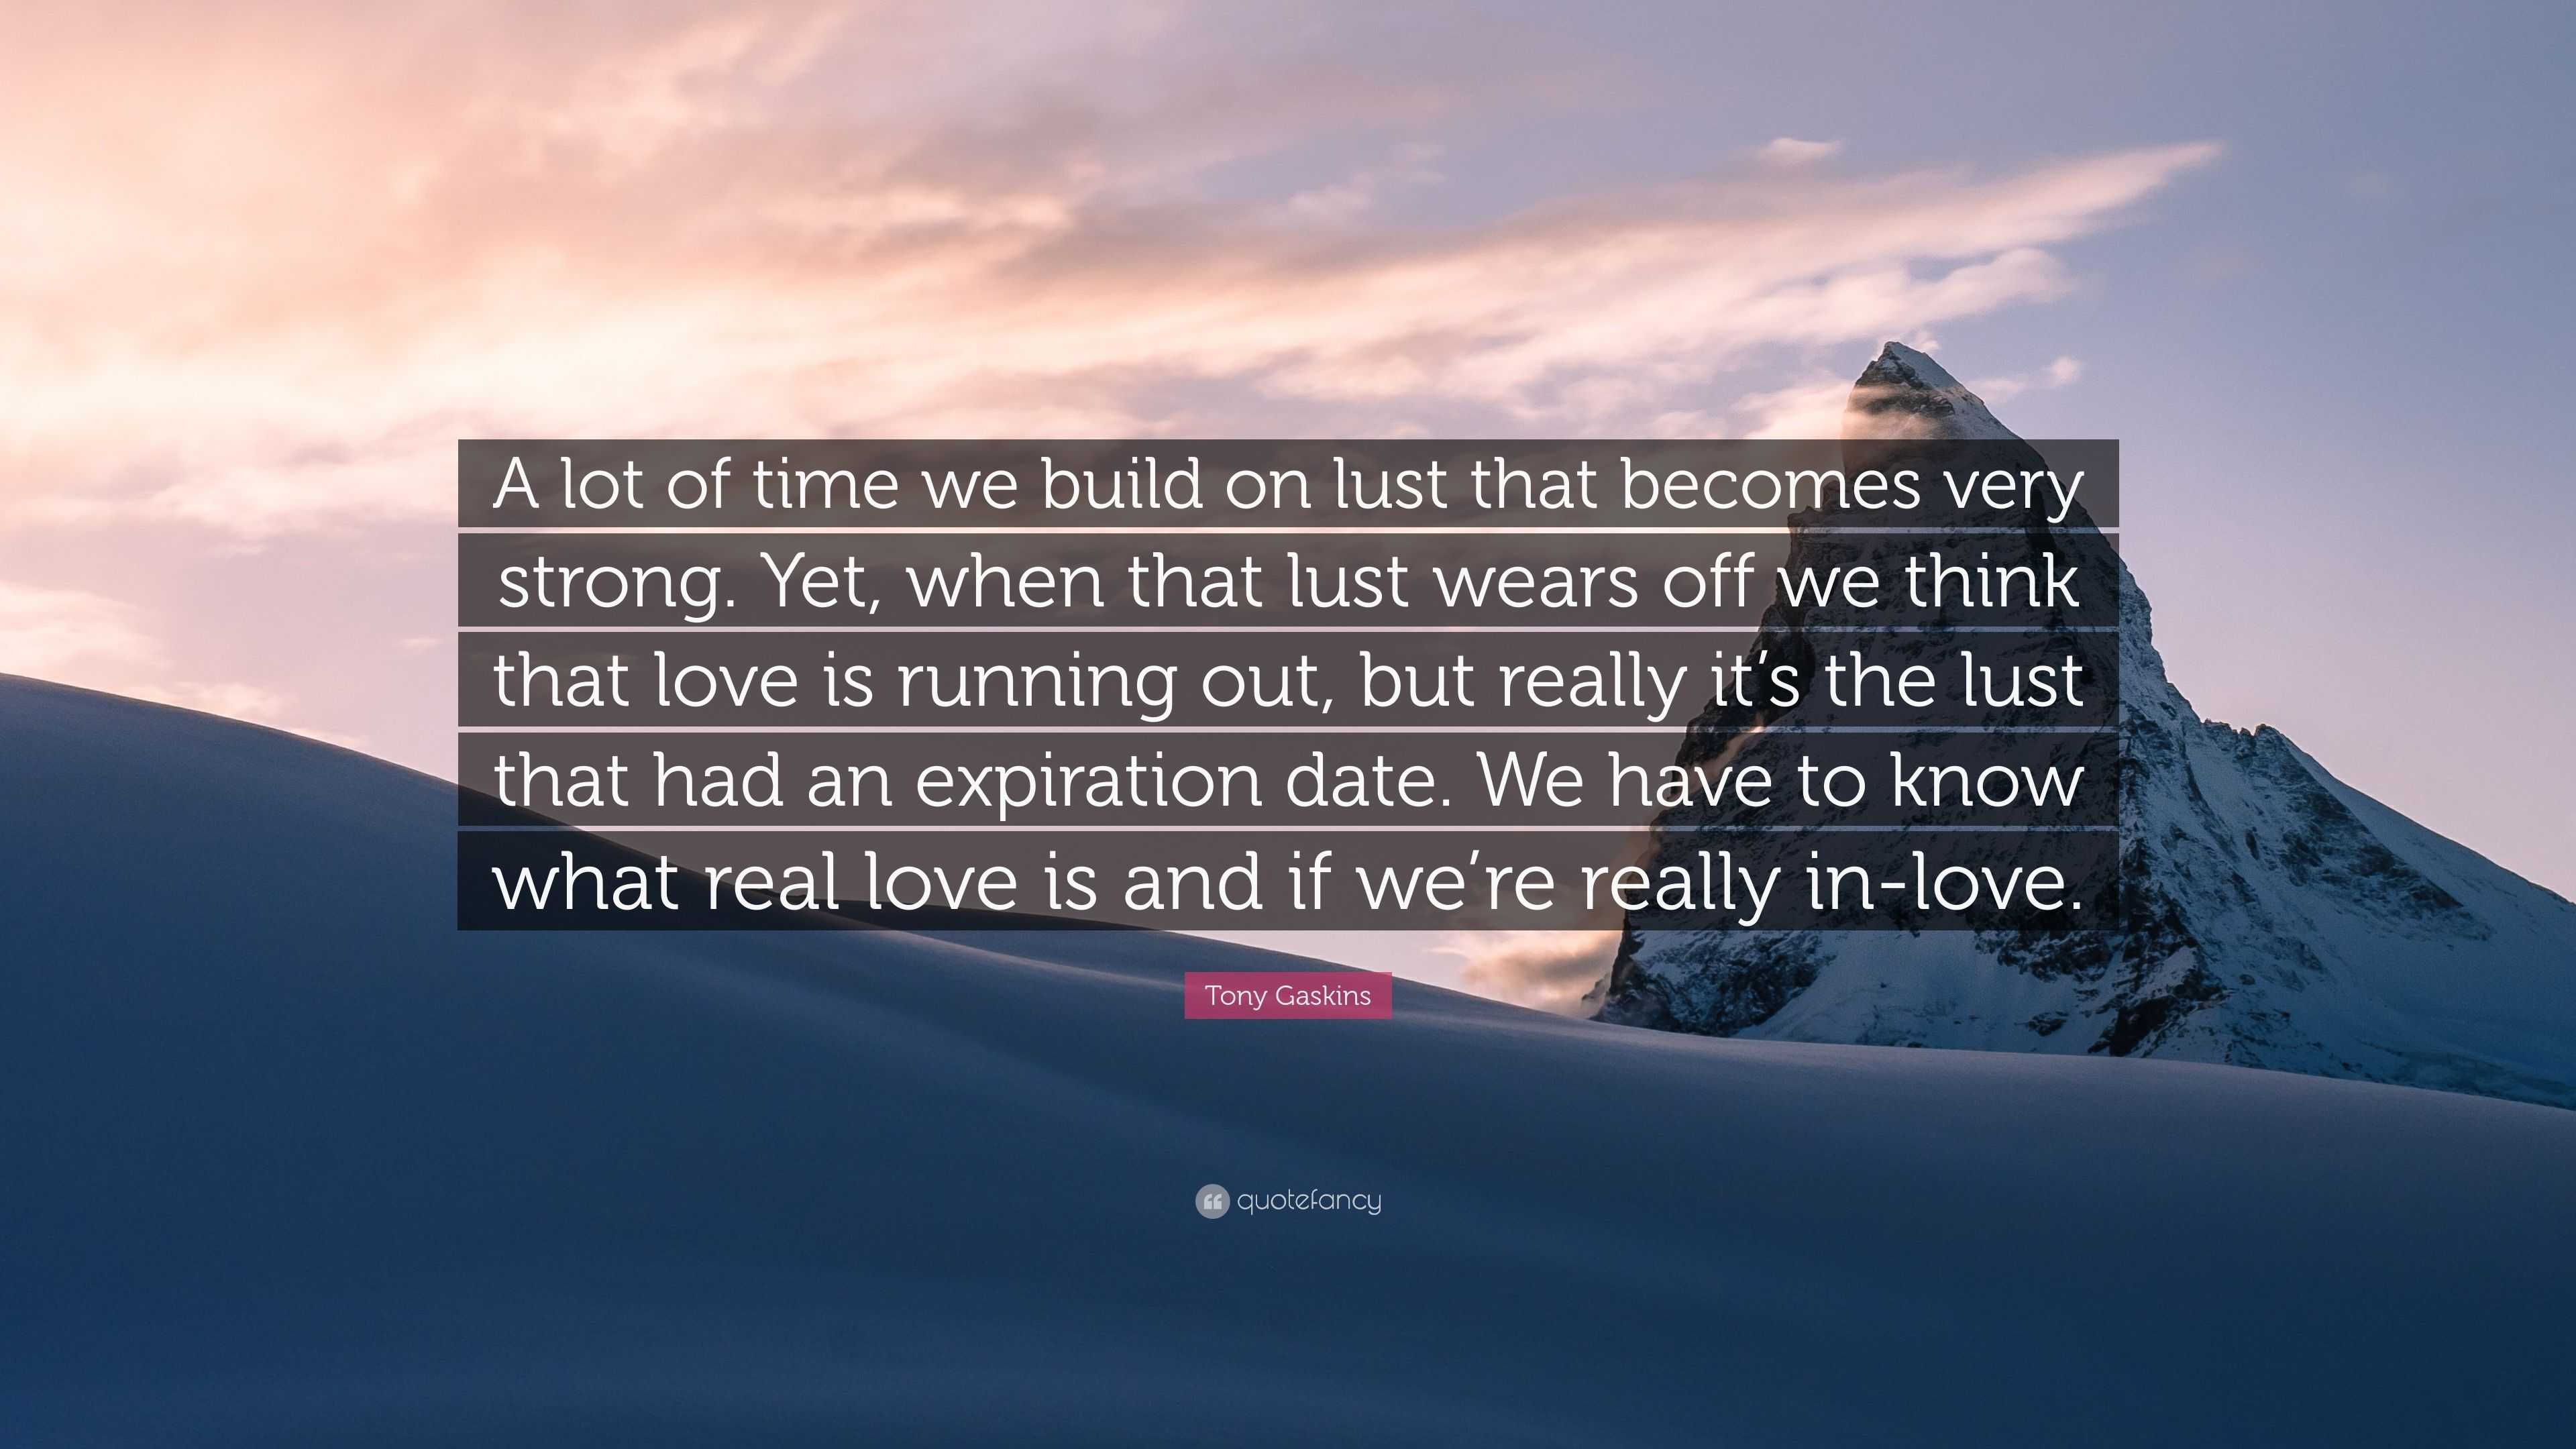 Tony Gaskins Quote “A lot of time we build on lust that be es very